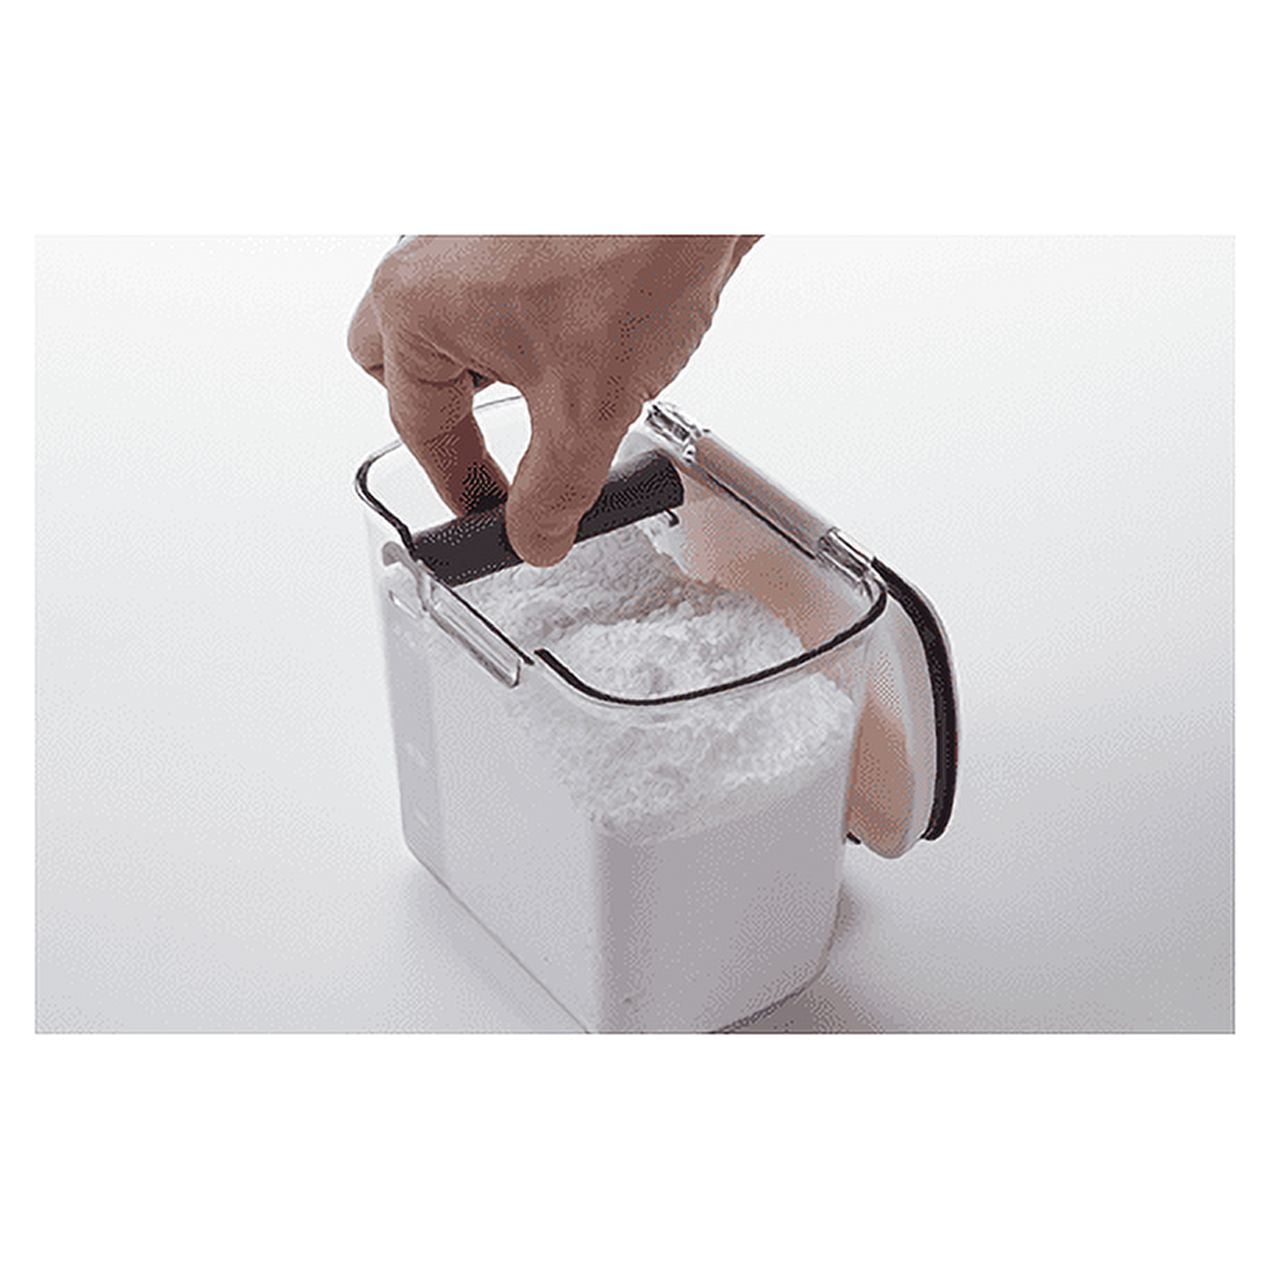 ProKeeper+ Powdered Sugar Container